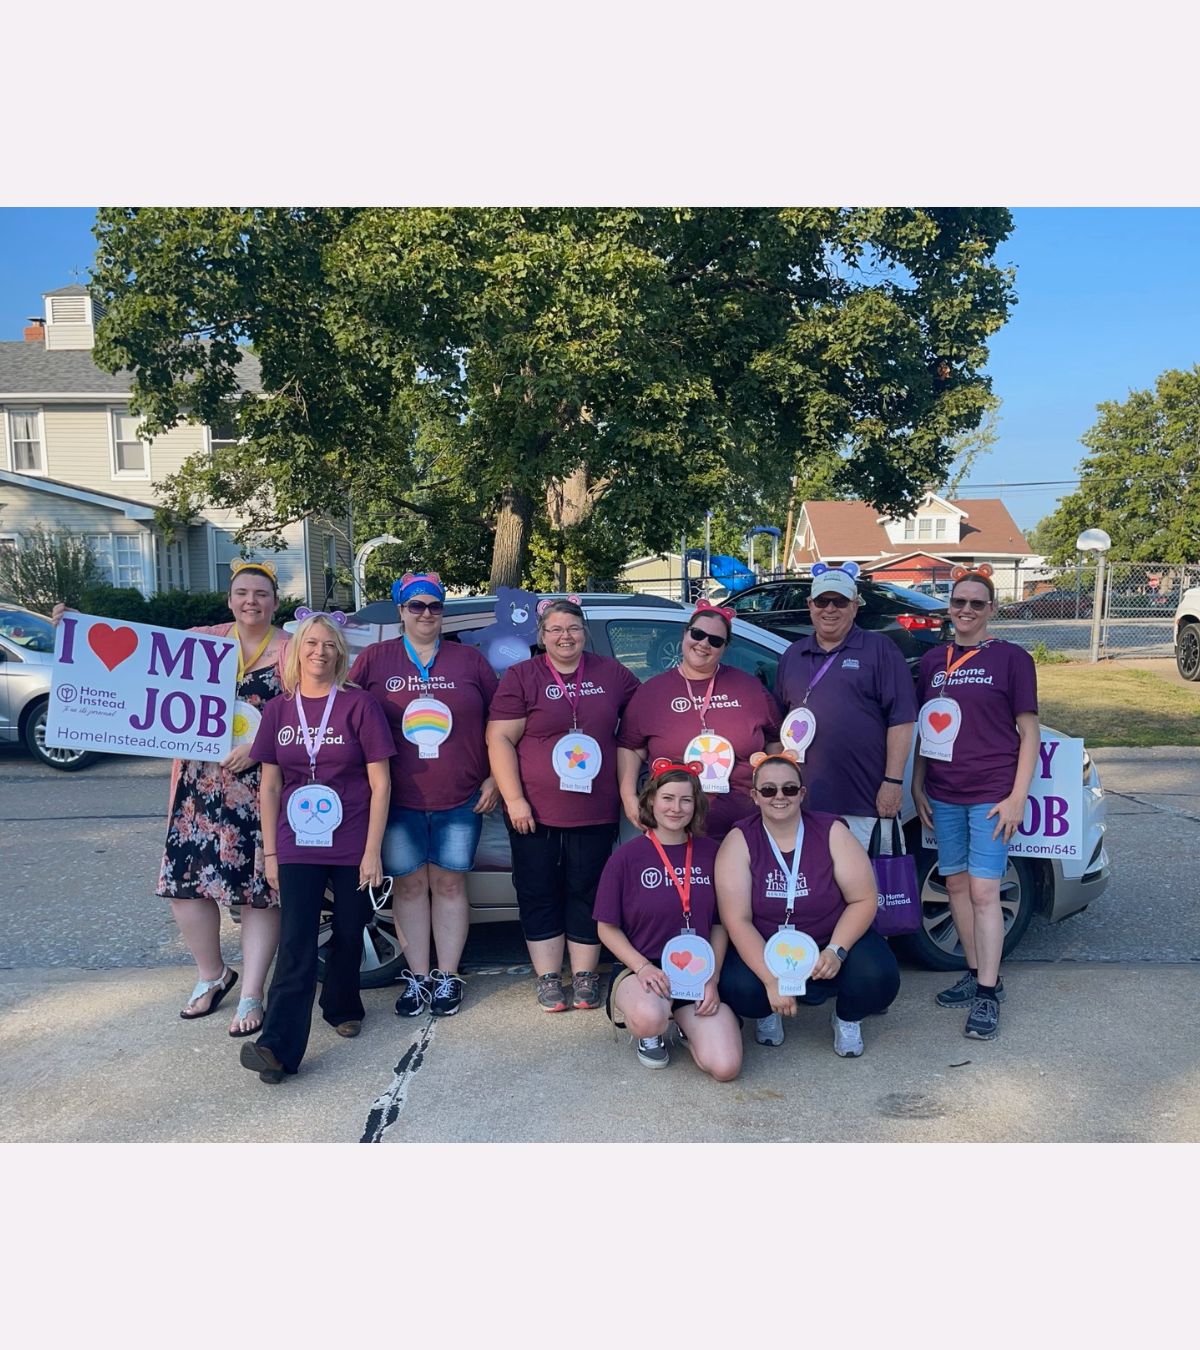 home instead of jacksonville illinois home care team at a parade